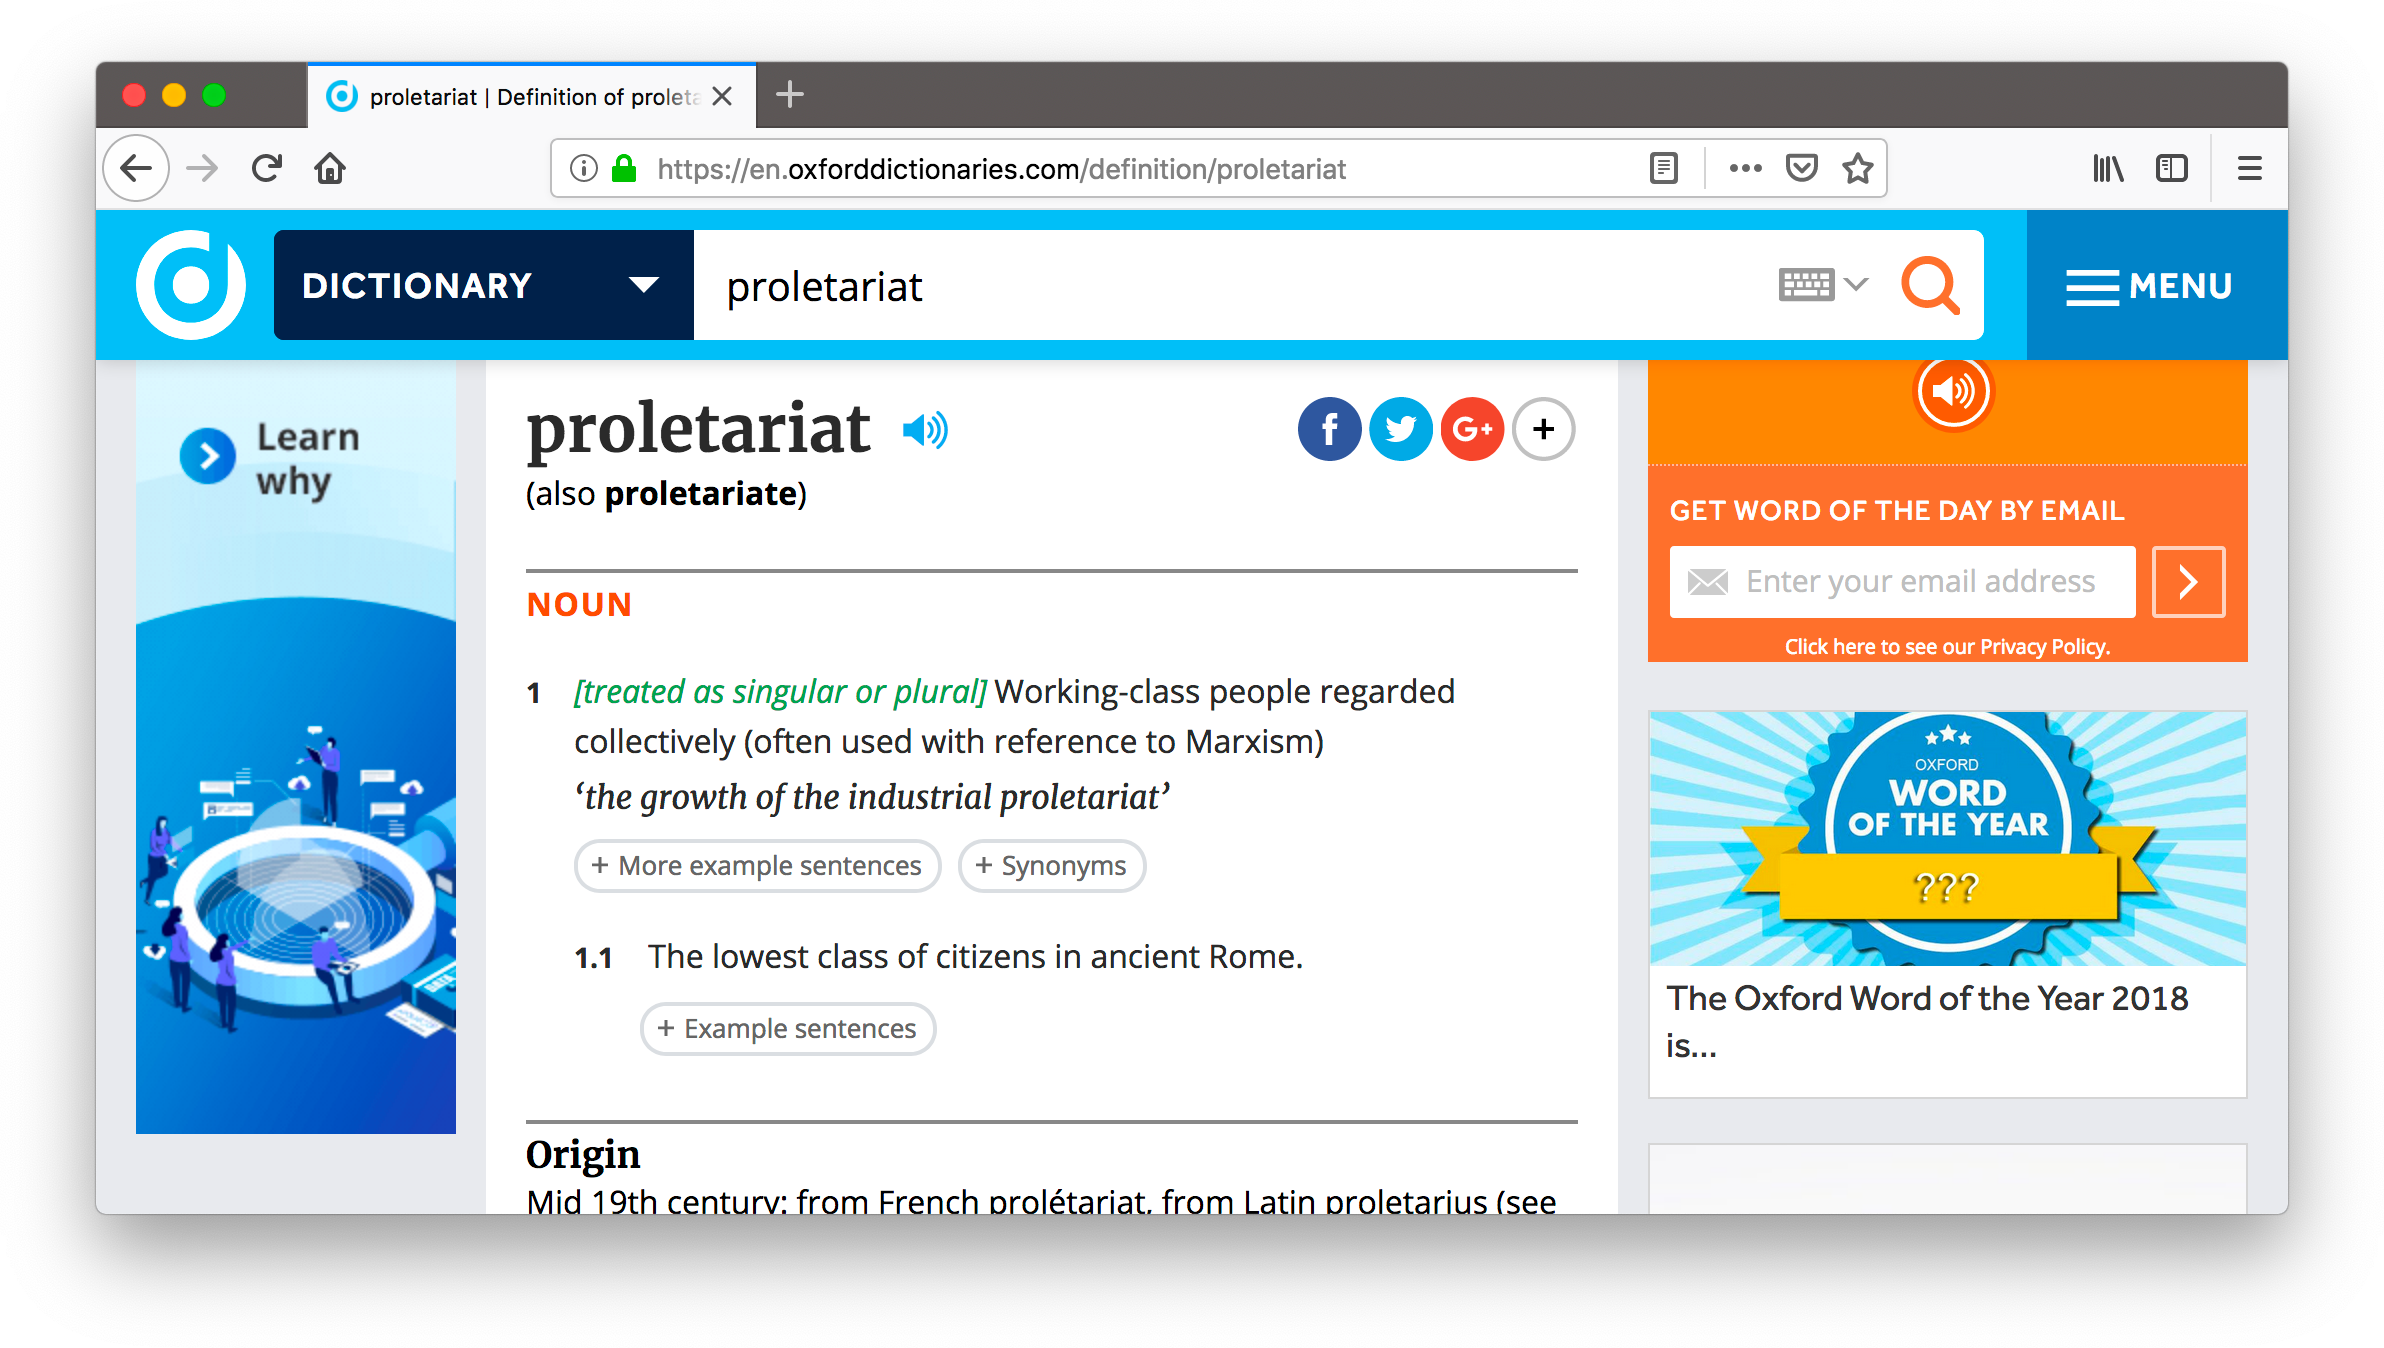 Screenshot of the definition of “proletariat”.